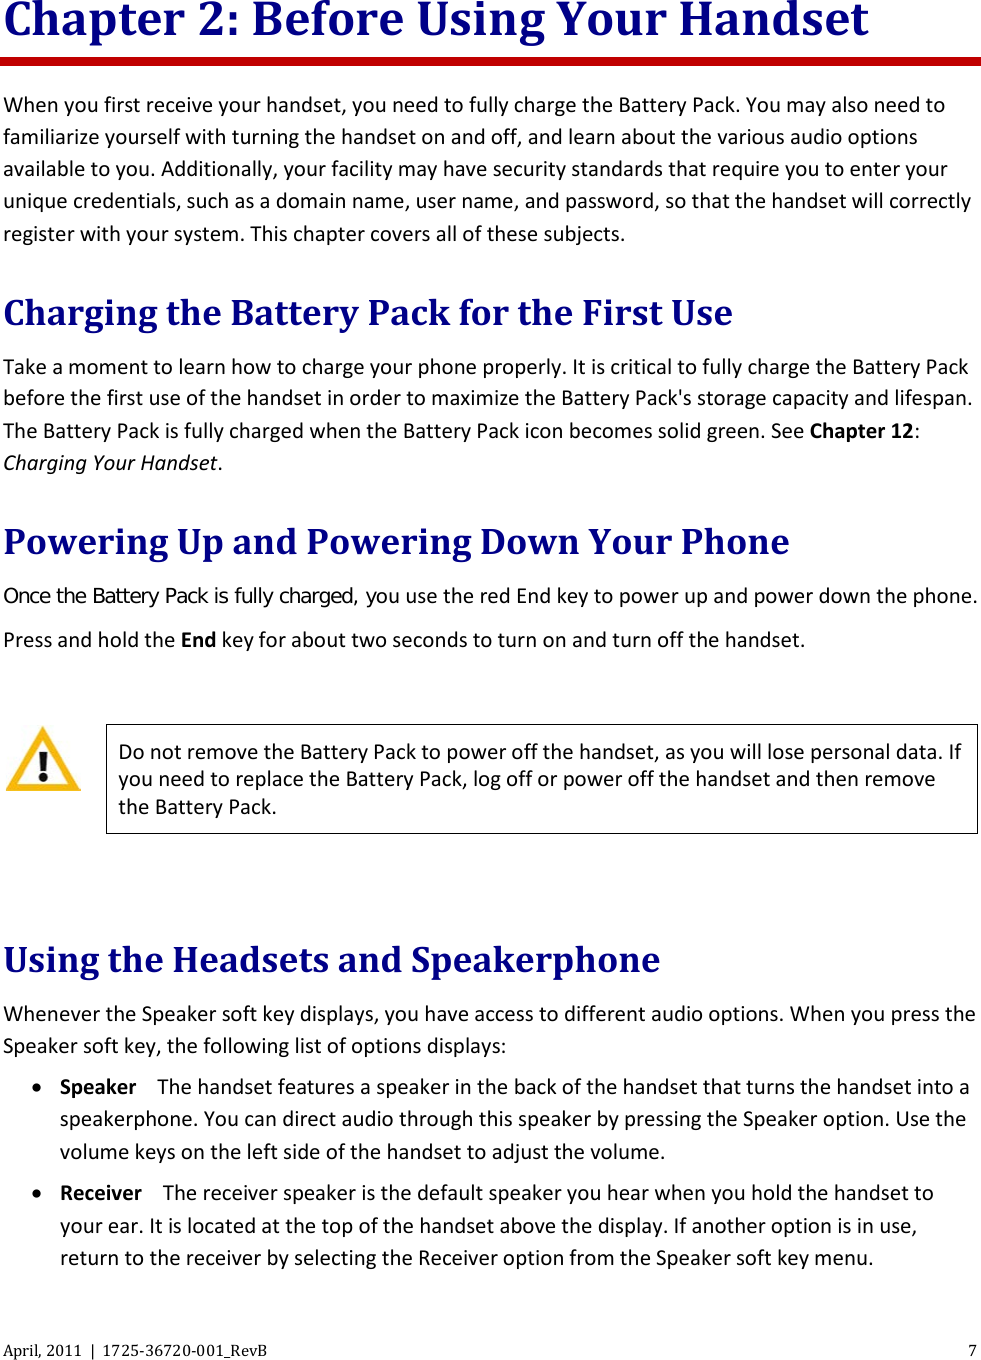  April, 2011  |  1725-36720-001_RevB  7  Chapter 2: Before Using Your Handset When you first receive your handset, you need to fully charge the Battery Pack. You may also need to familiarize yourself with turning the handset on and off, and learn about the various audio options available to you. Additionally, your facility may have security standards that require you to enter your unique credentials, such as a domain name, user name, and password, so that the handset will correctly register with your system. This chapter covers all of these subjects. Charging the Battery Pack for the First Use Take a moment to learn how to charge your phone properly. It is critical to fully charge the Battery Pack before the first use of the handset in order to maximize the Battery Pack&apos;s storage capacity and lifespan. The Battery Pack is fully charged when the Battery Pack icon becomes solid green. See Chapter 12: Charging Your Handset. Powering Up and Powering Down Your Phone Once the Battery Pack is fully charged, you use the red End key to power up and power down the phone. Press and hold the End key for about two seconds to turn on and turn off the handset.   Do not remove the Battery Pack to power off the handset, as you will lose personal data. If you need to replace the Battery Pack, log off or power off the handset and then remove the Battery Pack.  Using the Headsets and Speakerphone Whenever the Speaker soft key displays, you have access to different audio options. When you press the Speaker soft key, the following list of options displays: • Speaker The handset features a speaker in the back of the handset that turns the handset into a speakerphone. You can direct audio through this speaker by pressing the Speaker option. Use the volume keys on the left side of the handset to adjust the volume. • Receiver The receiver speaker is the default speaker you hear when you hold the handset to your ear. It is located at the top of the handset above the display. If another option is in use, return to the receiver by selecting the Receiver option from the Speaker soft key menu. 